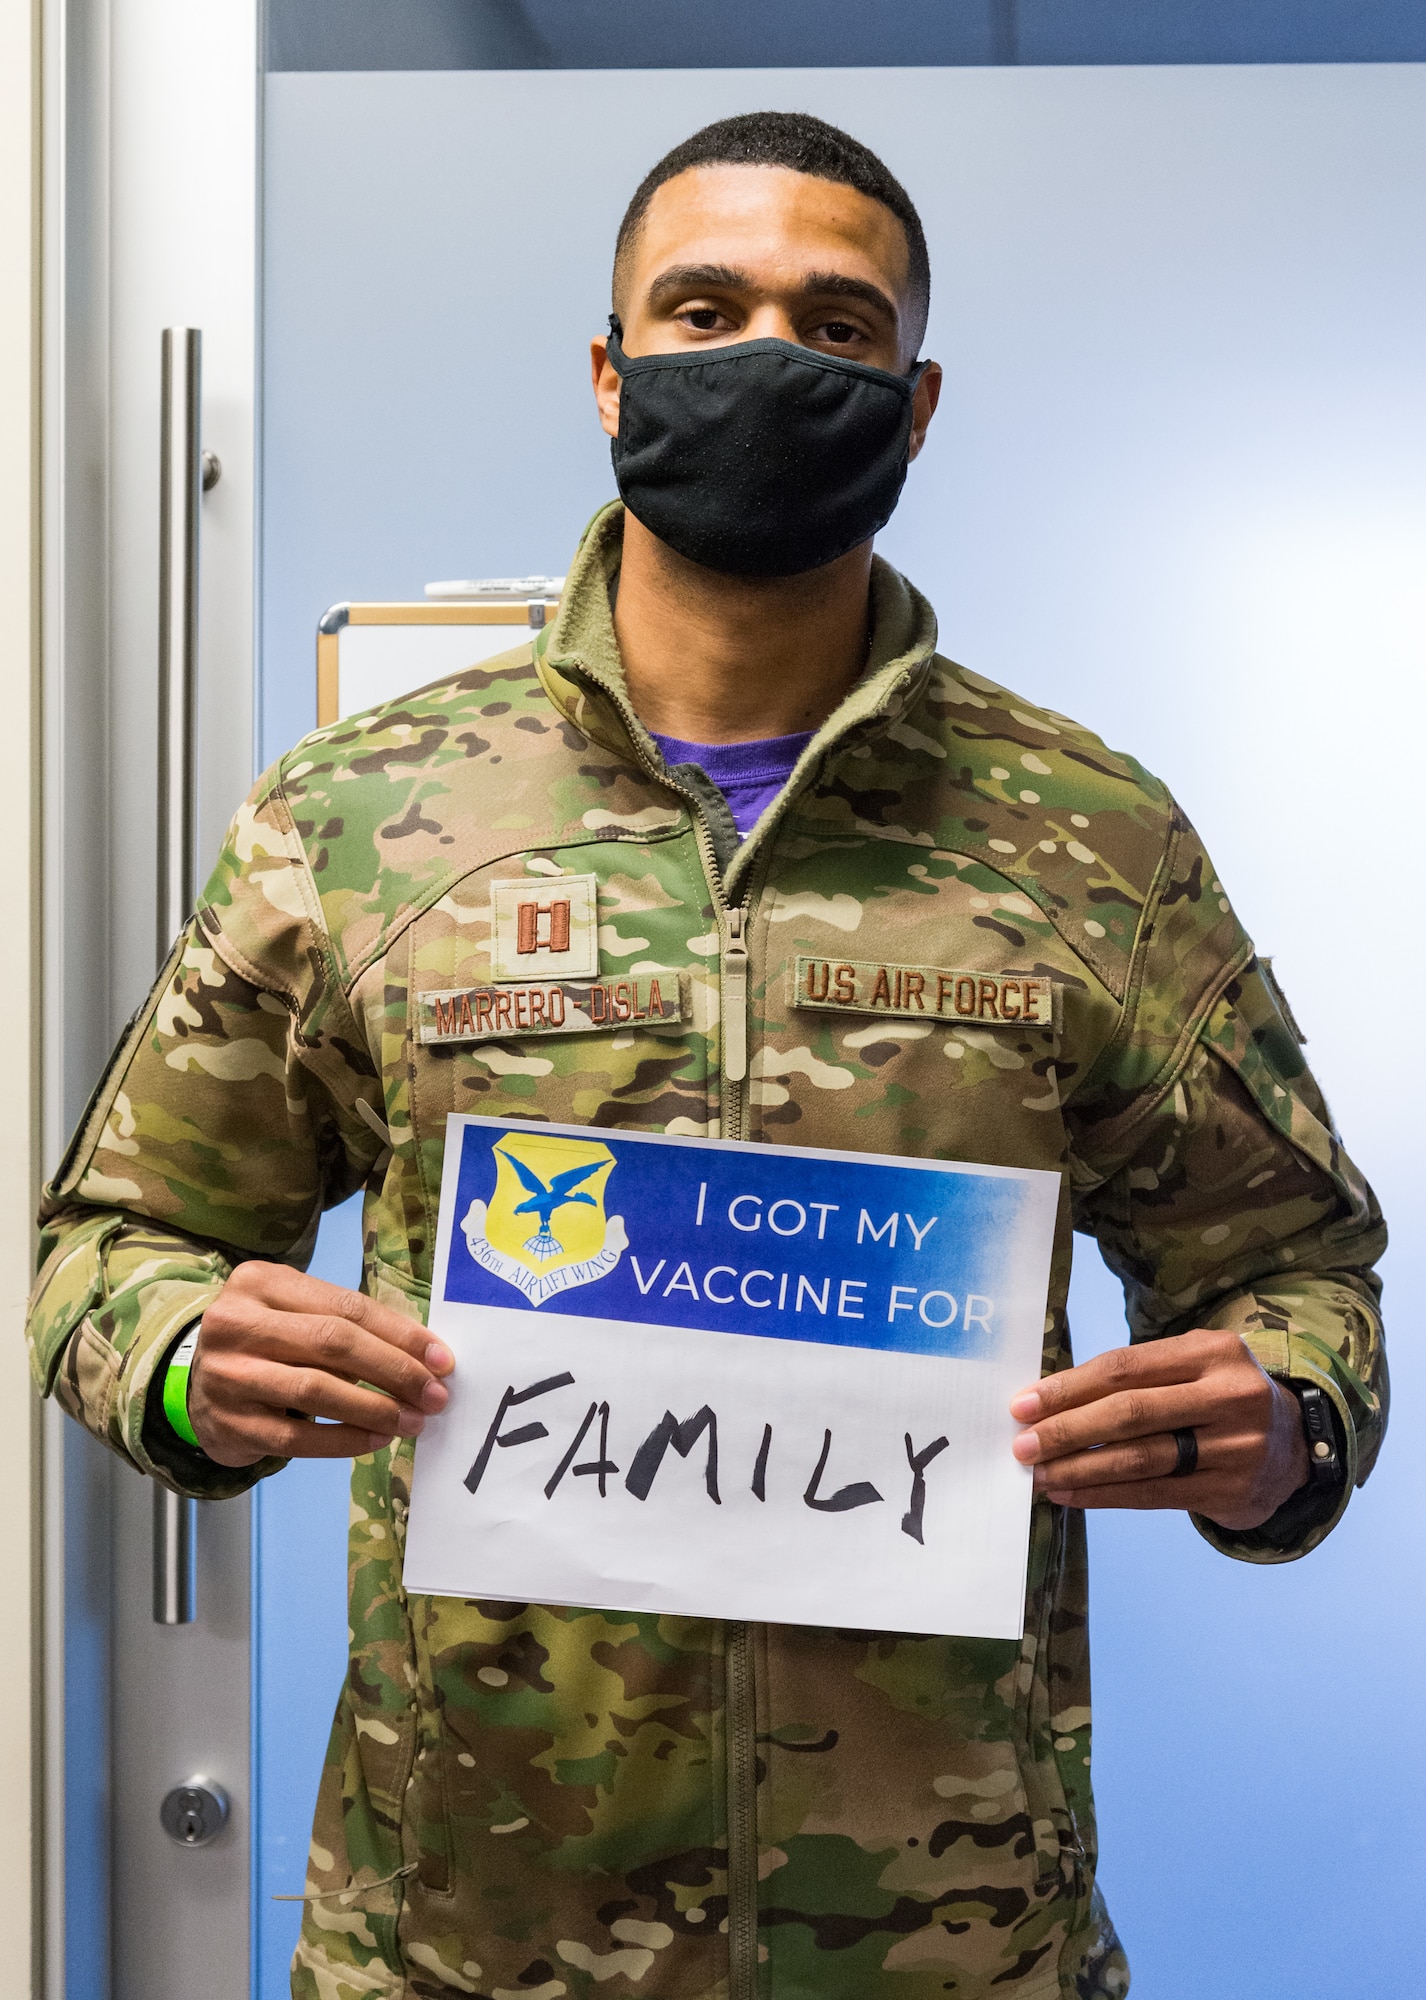 Capt. Marcos Marrero-Disla, 3rd Airlift Squadron C-17 Globemaster III pilot scheduler, displays a sign stating why he volunteered for the COVID-19 vaccine Jan. 22, 2021, at Dover Air Force Base, Delaware. Marrero-Disla was among the first Team Dover front-line workers who voluntarily received the vaccine in accordance with Department of Defense guidance. The vaccine was granted emergency use authorization by the U.S. Food and Drug Administration for use in prevention of COVID-19. (U.S. Air Force photo by Roland Balik)